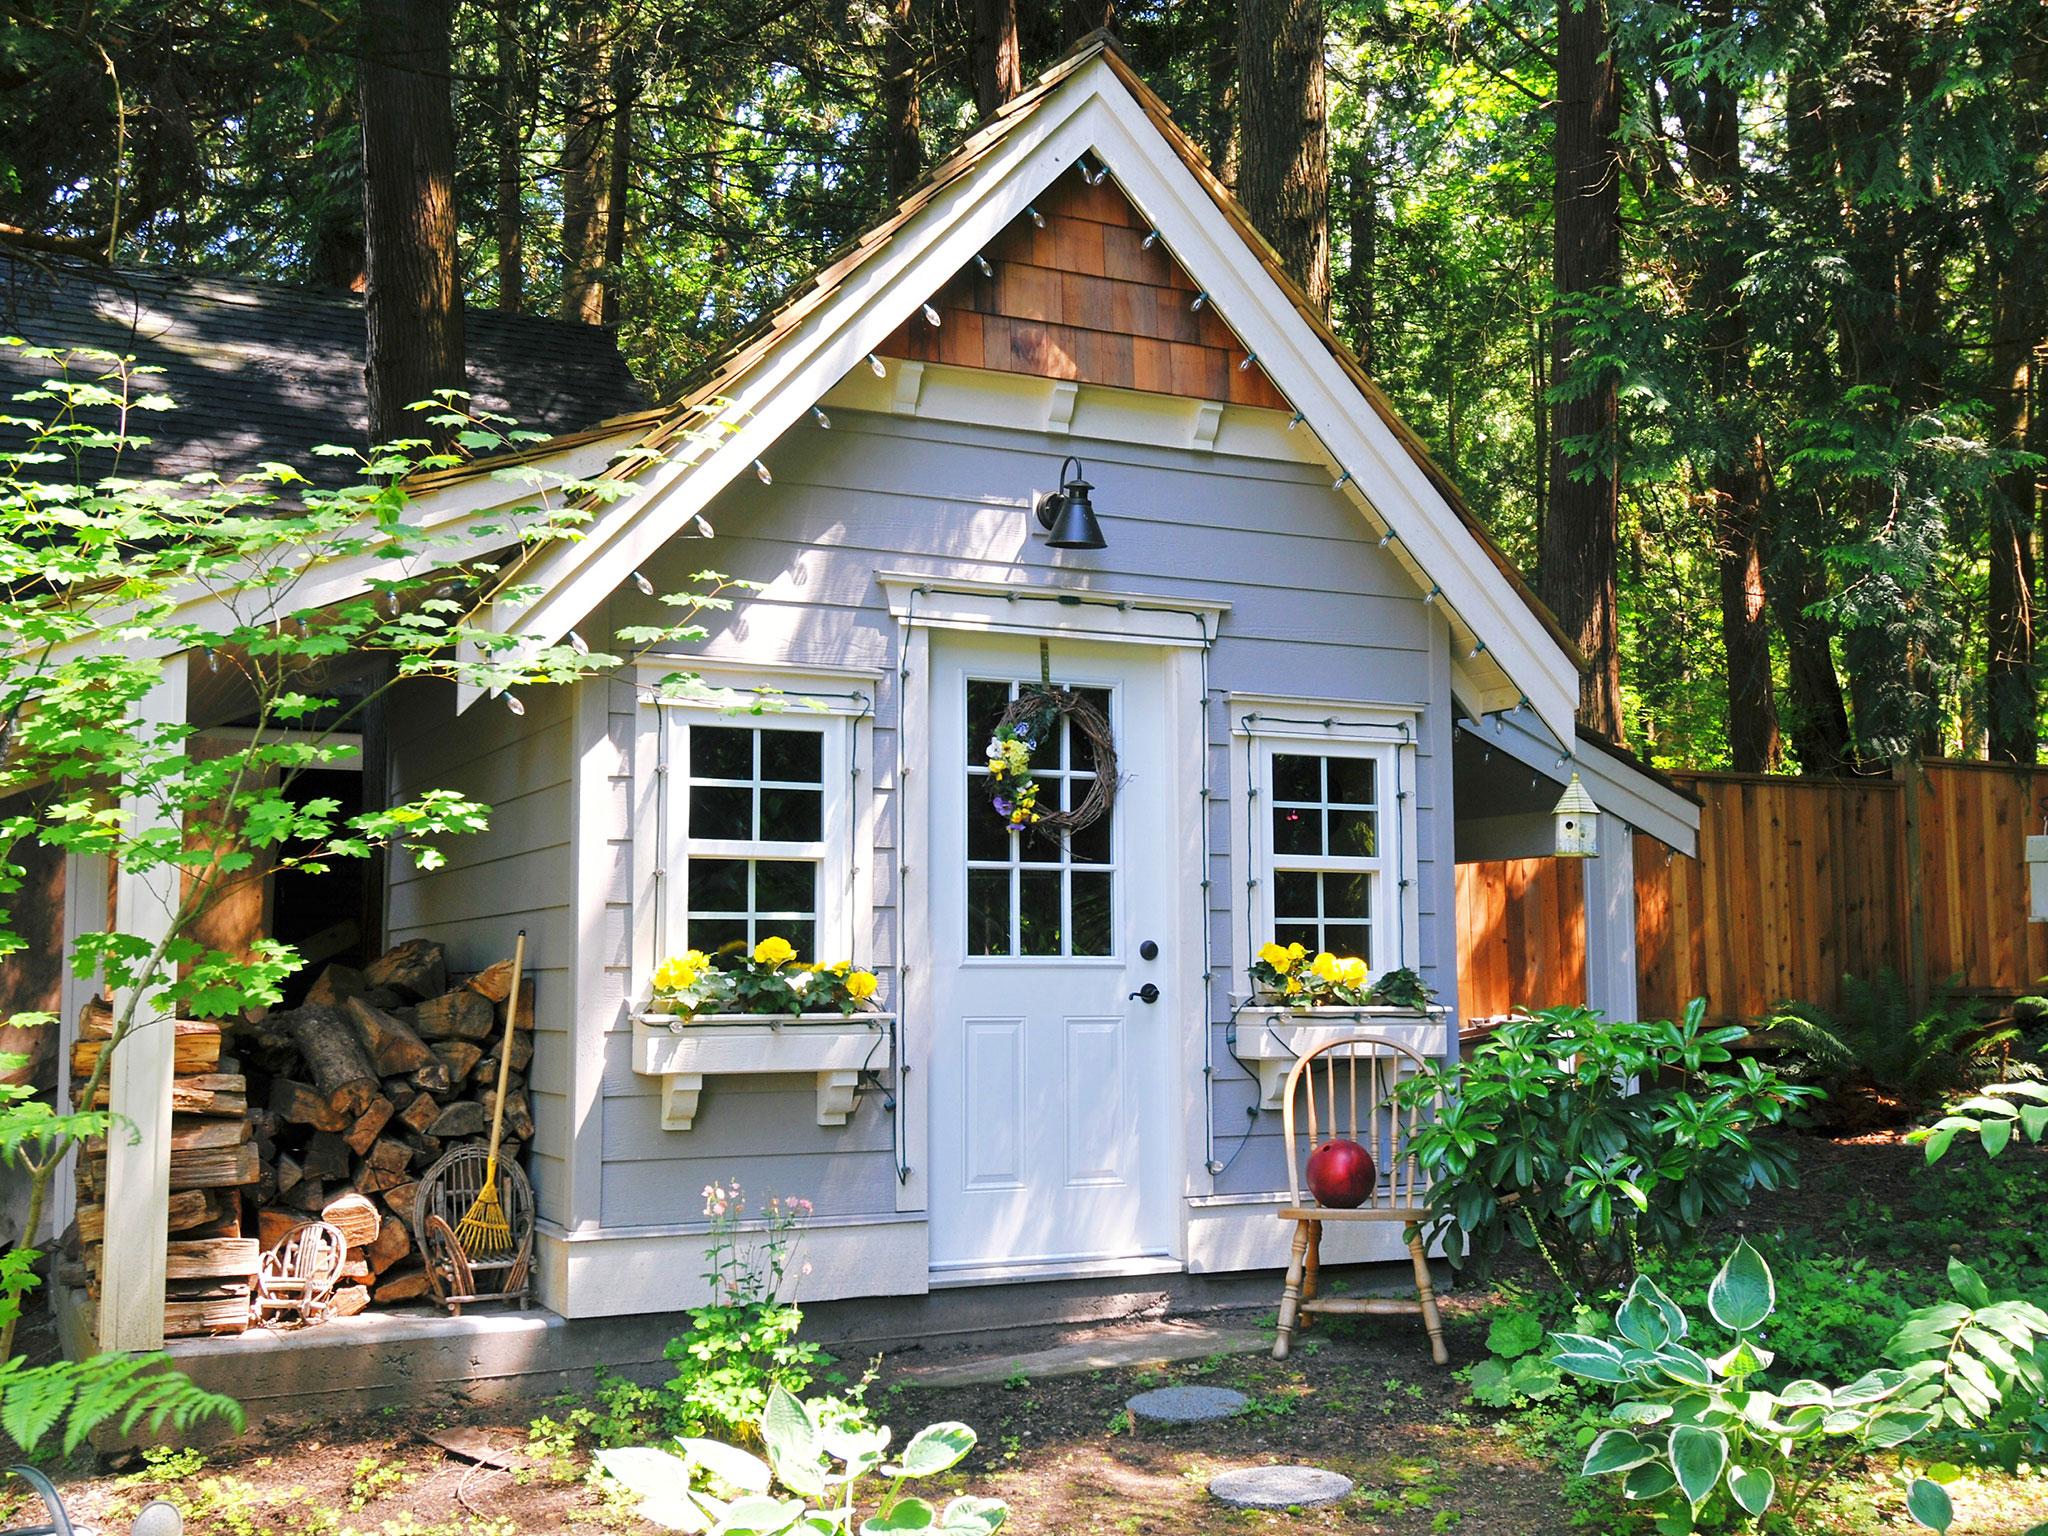 She-sheds are garden retreats rising in popularity 